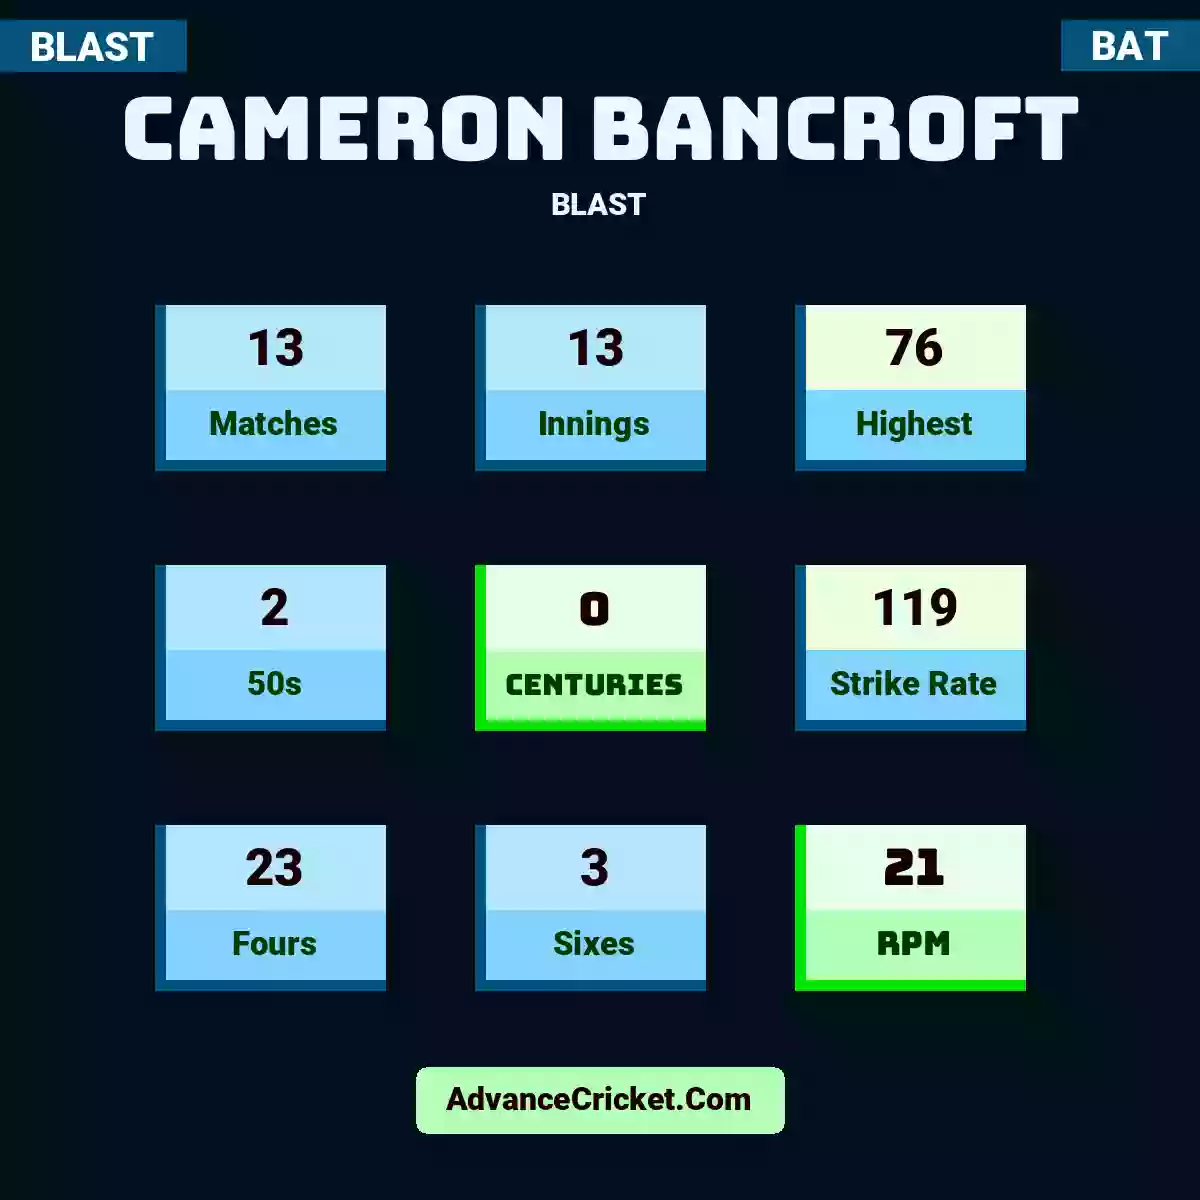 Cameron Bancroft BLAST , Cameron Bancroft played 13 matches, scored 76 runs as highest, 2 half-centuries, and 0 centuries, with a strike rate of 119. C.Bancroft hit 23 fours and 3 sixes, with an RPM of 21.